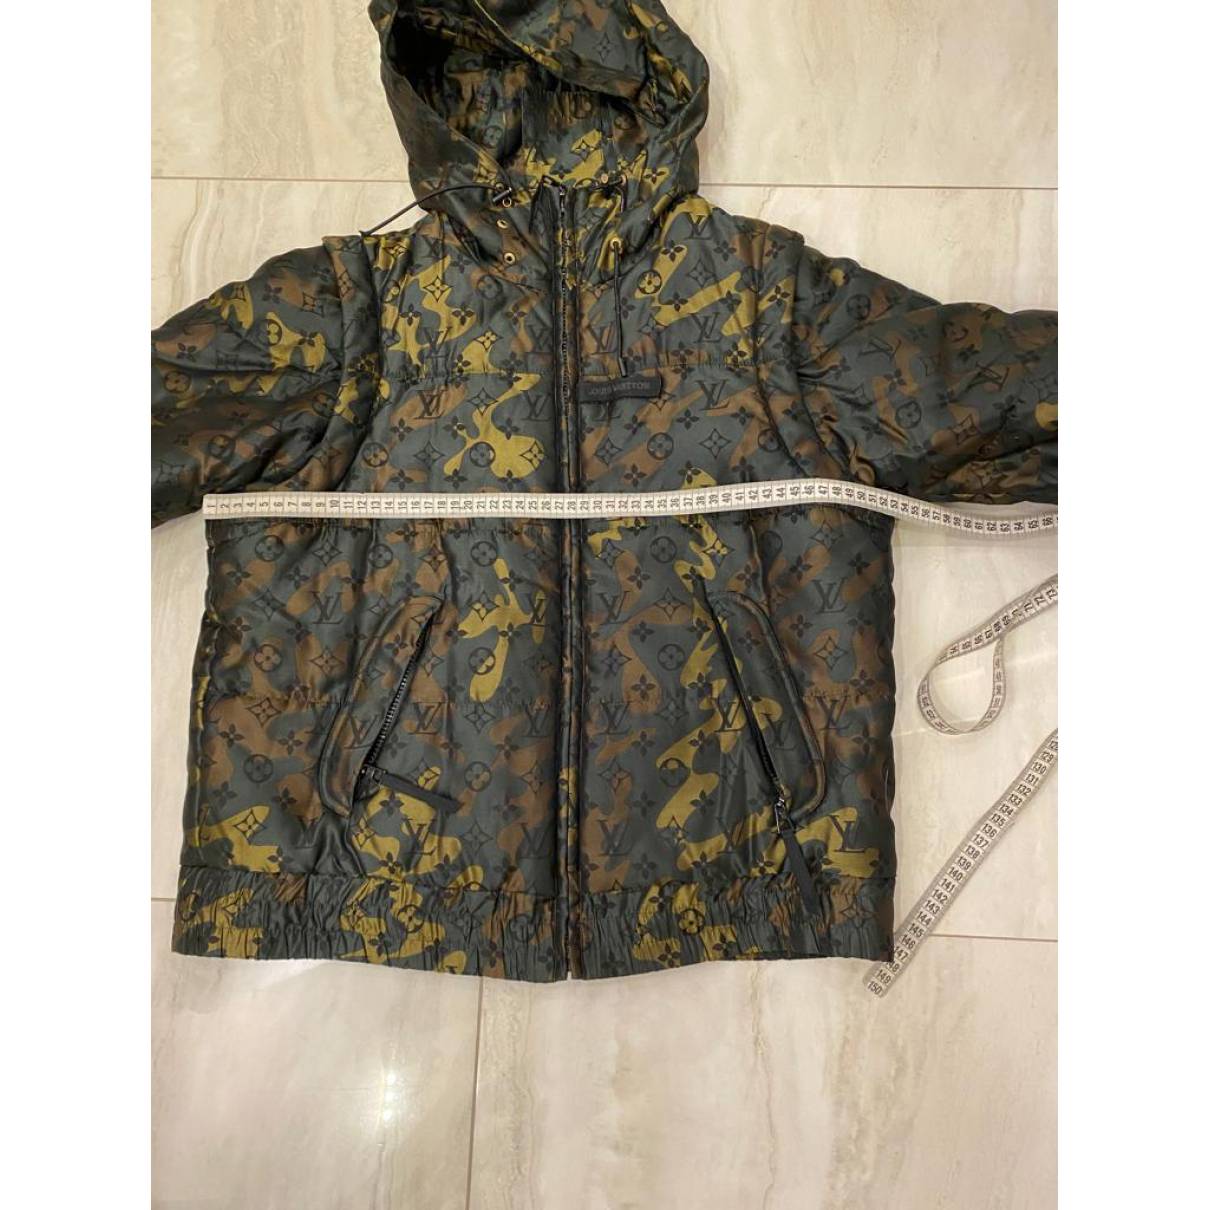 Jacket Louis Vuitton Black size 56 FR in Synthetic - 35267985